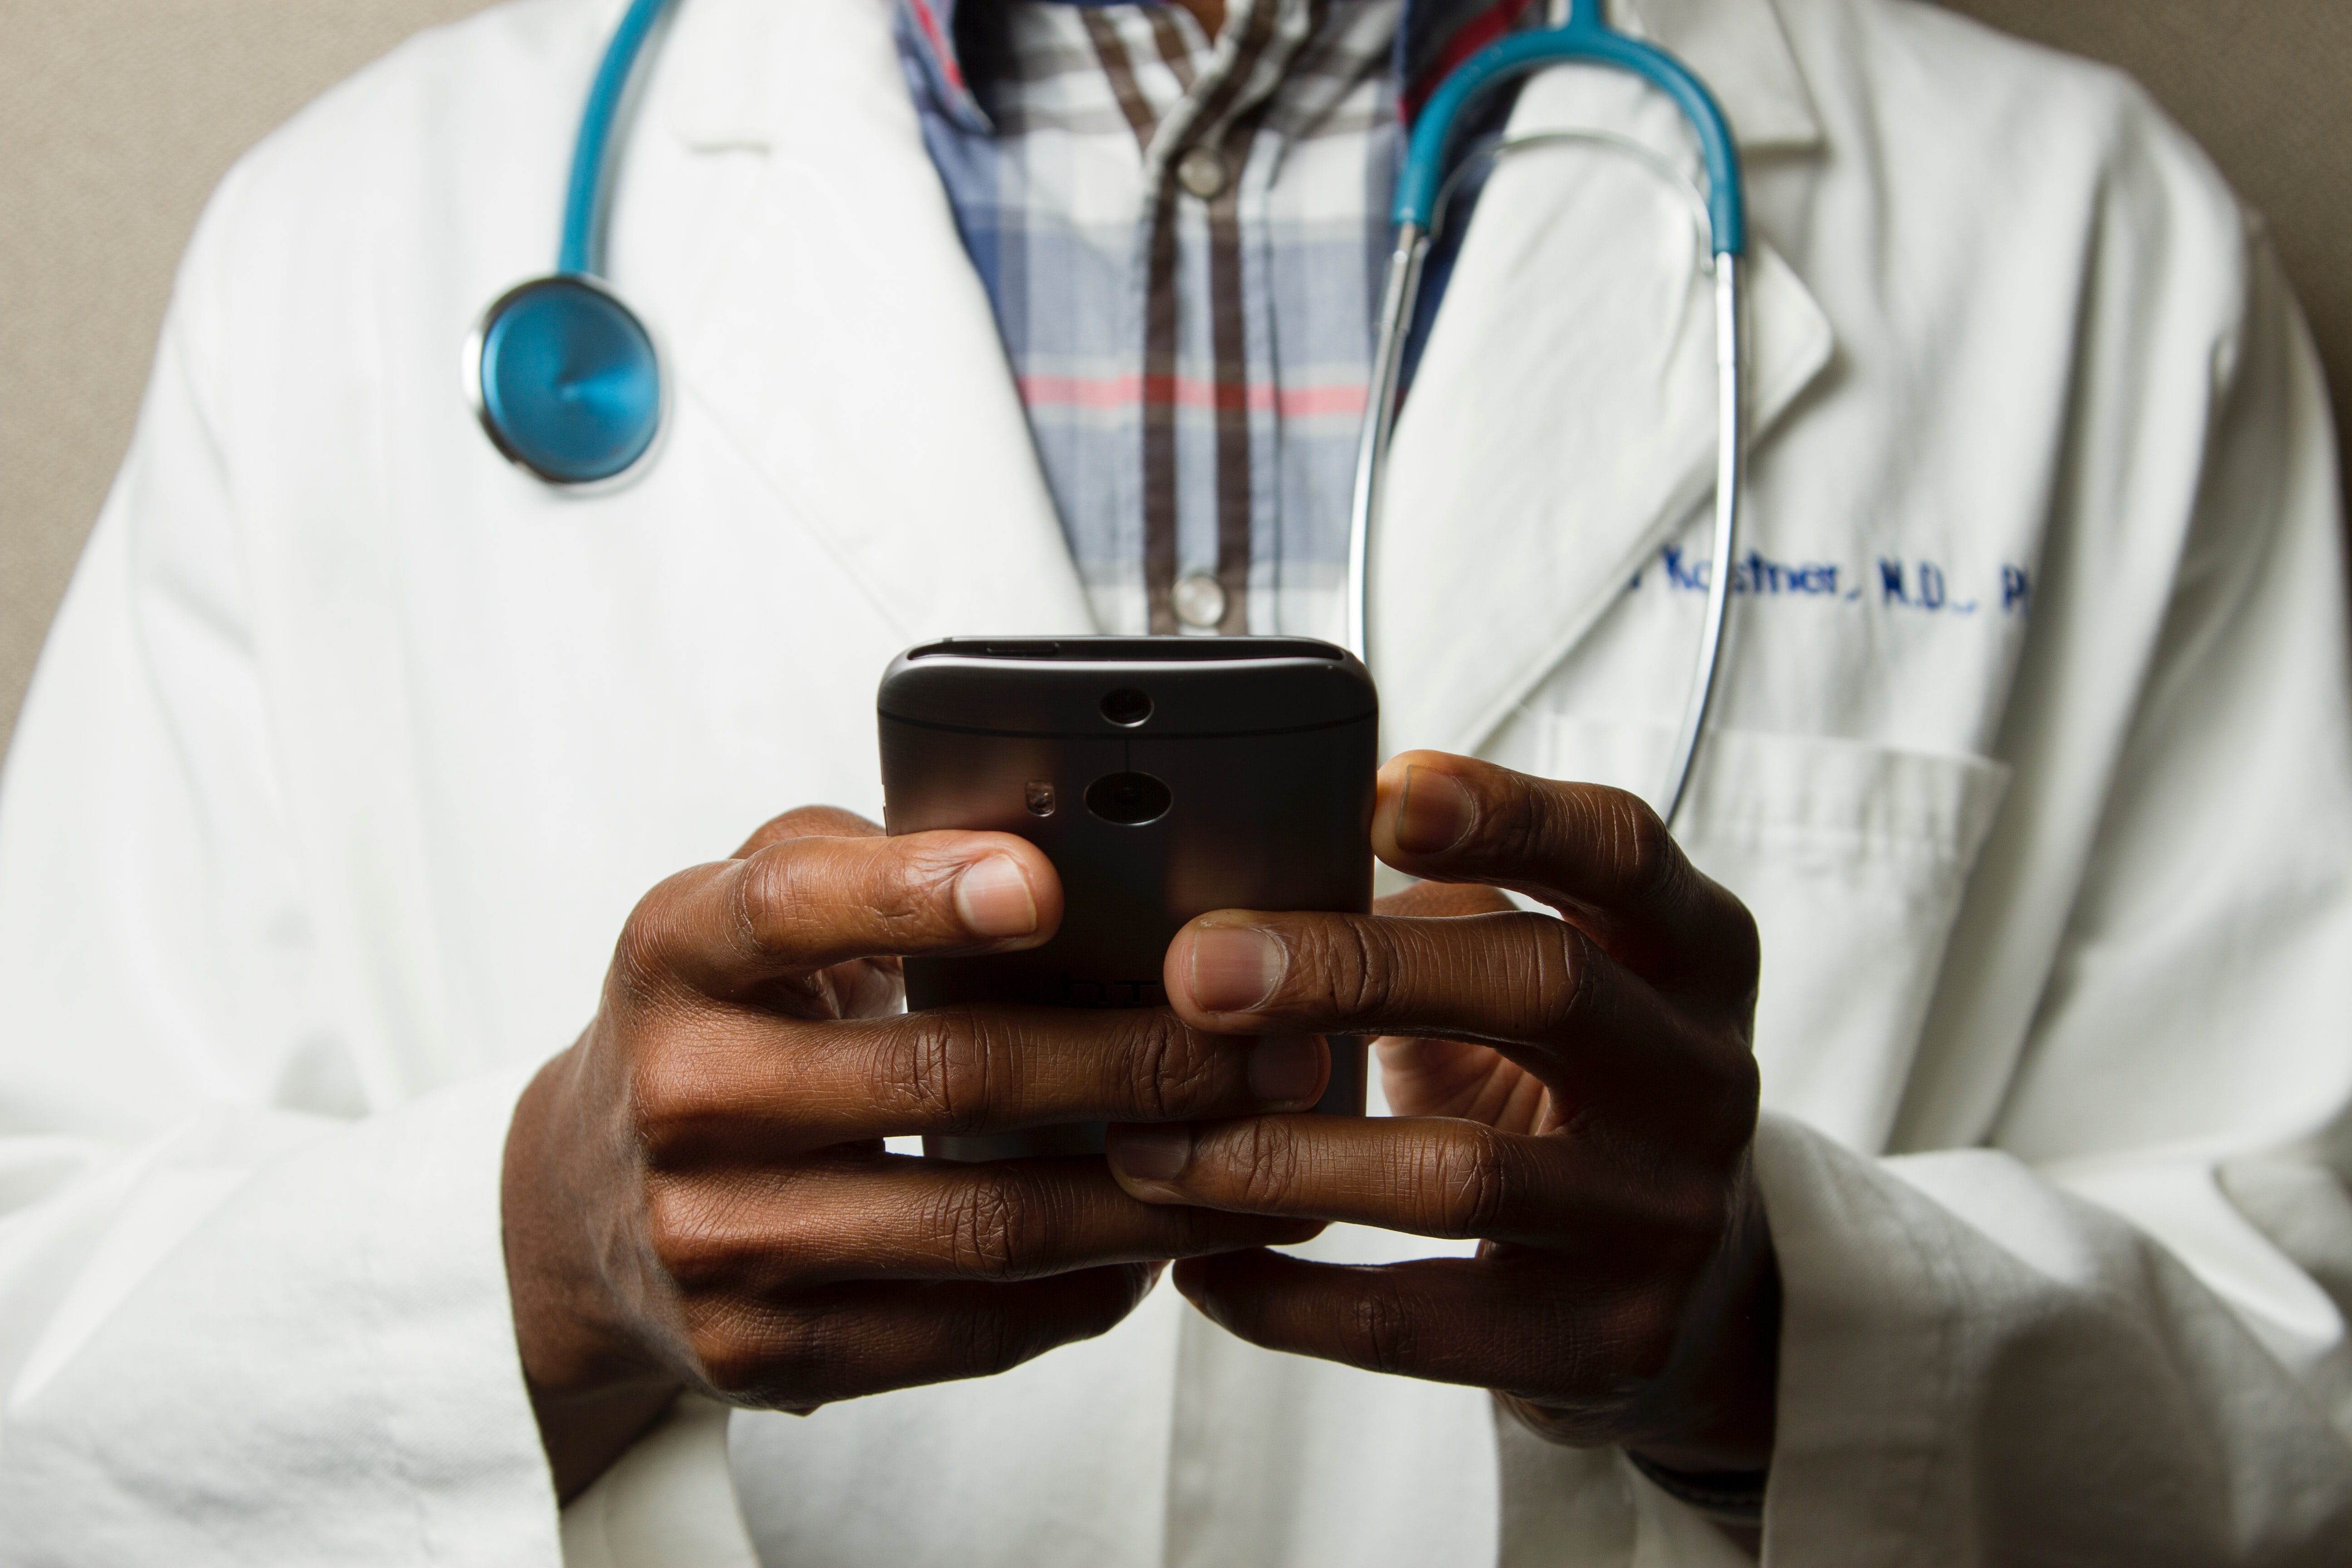 Medical professional texting on a smartphone.